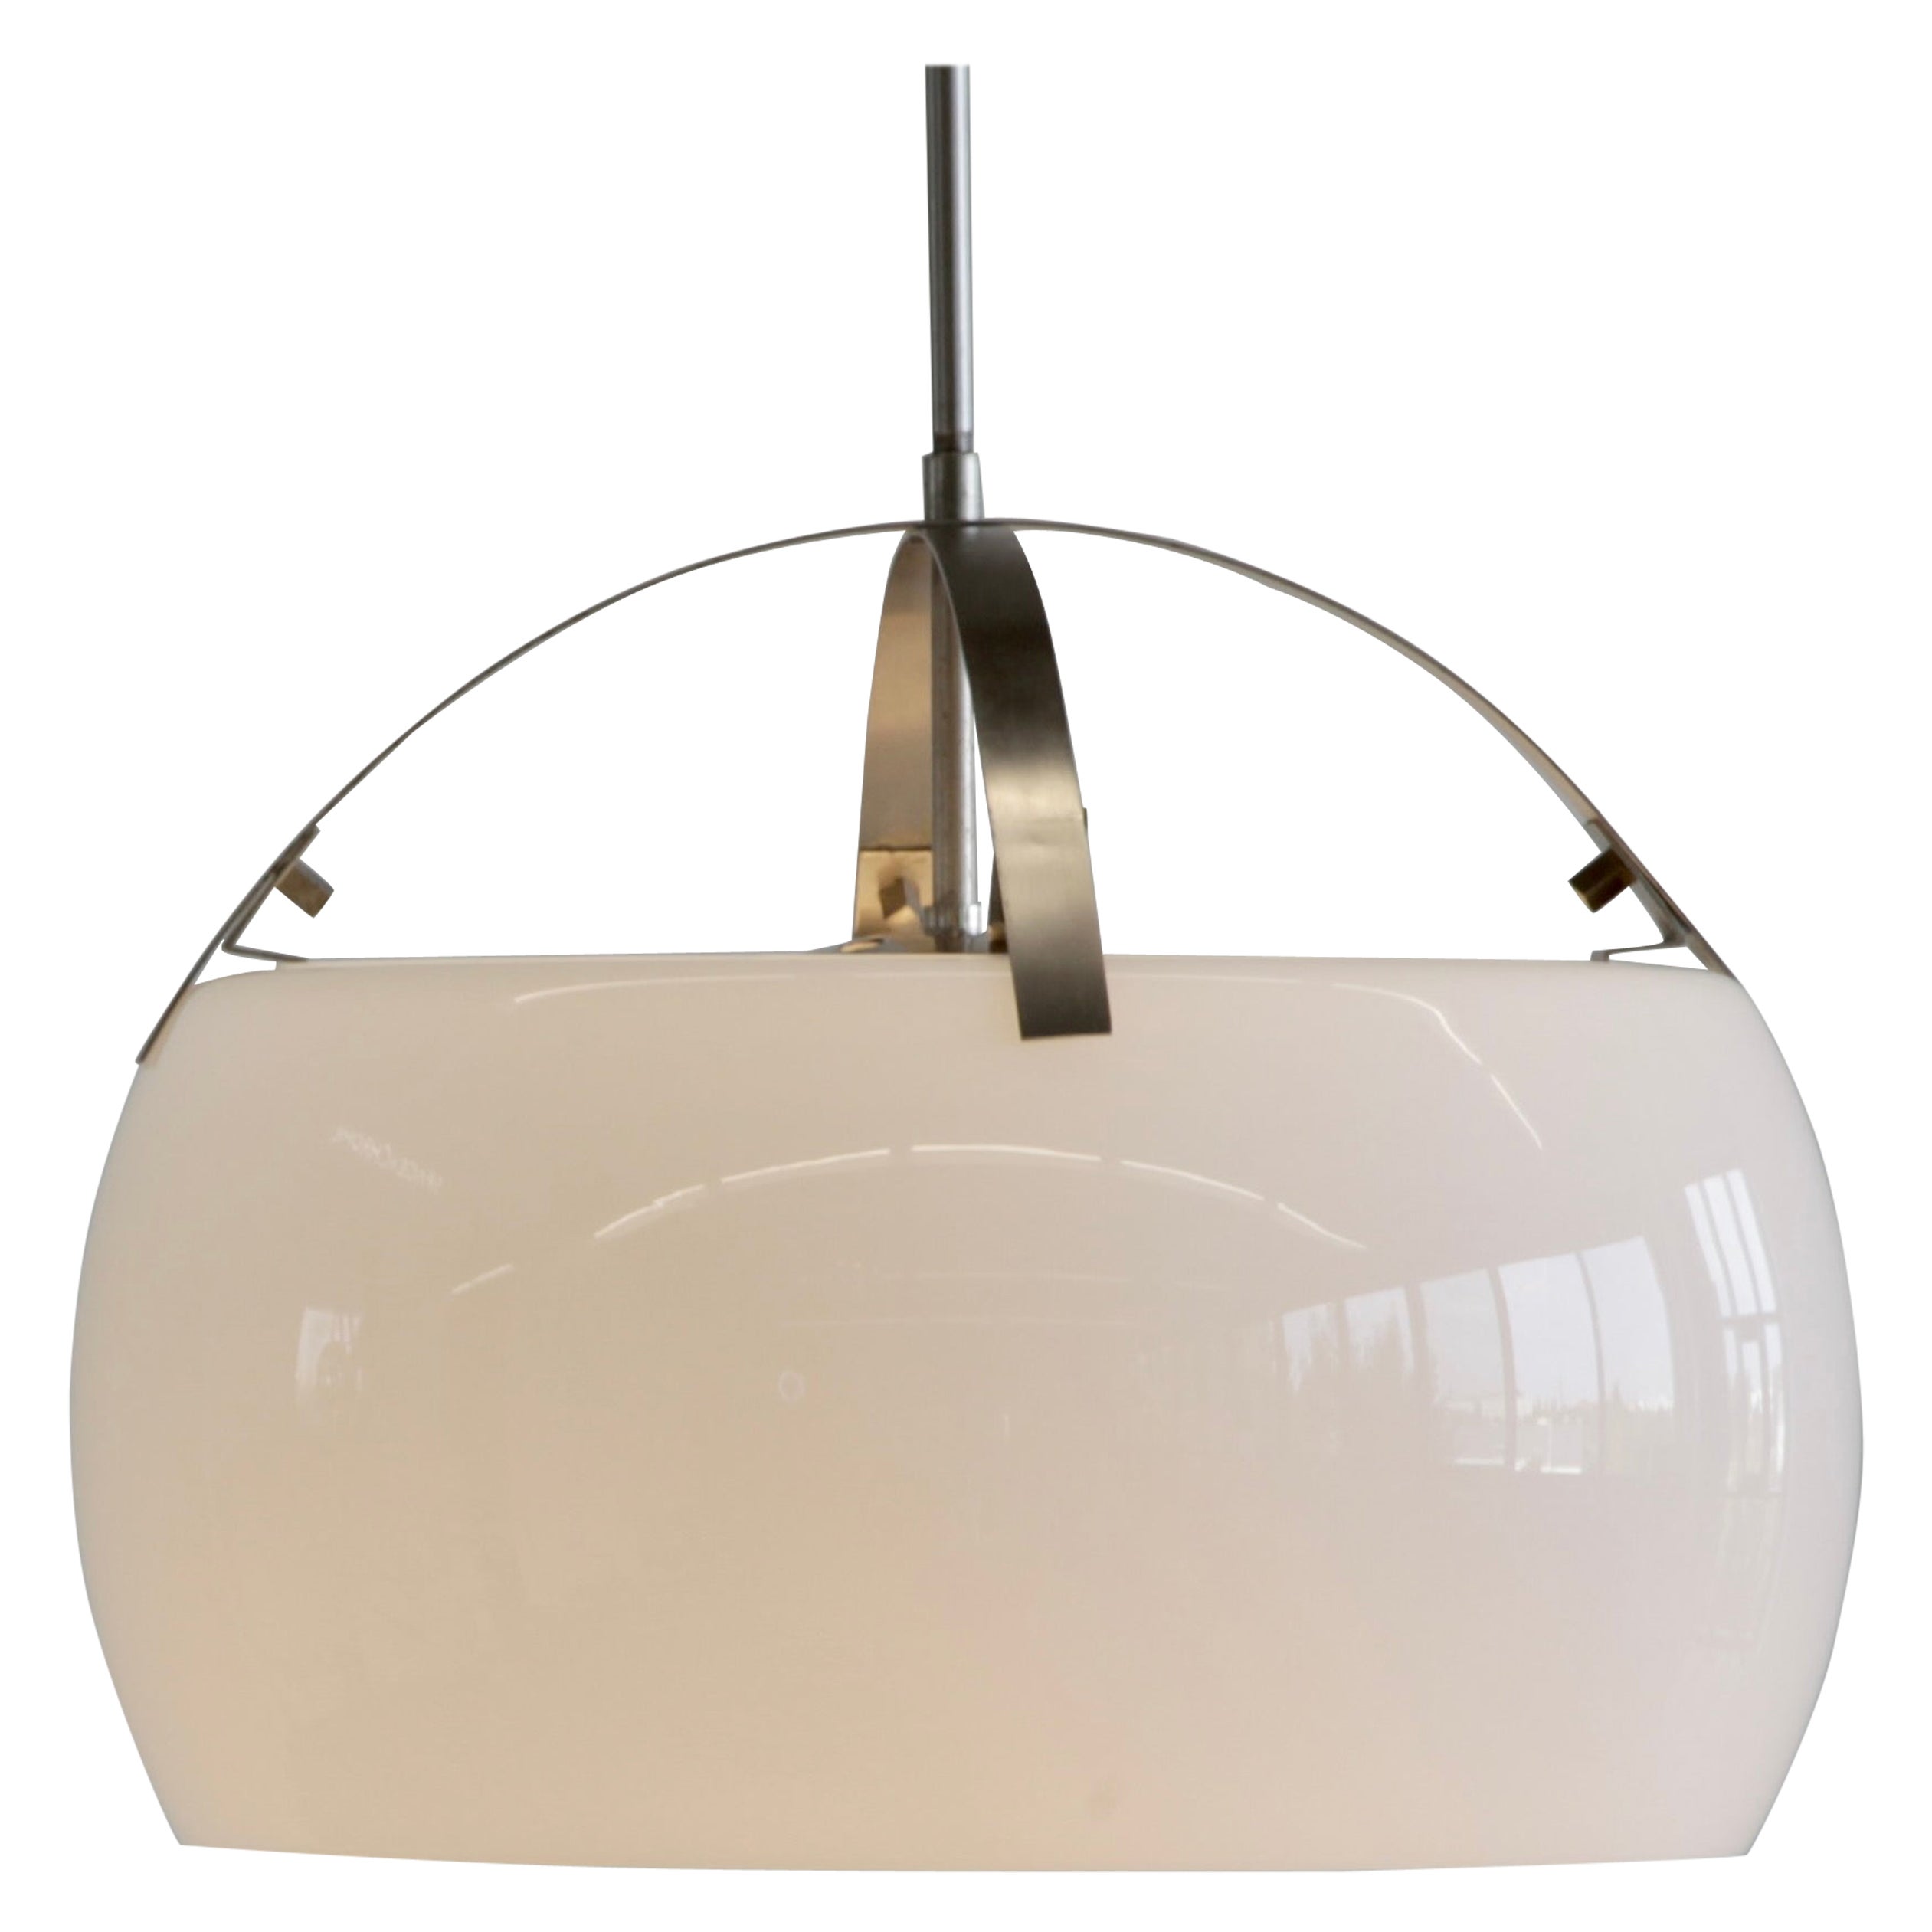 Omega Hanging Lamp by Vico Magistretti, 1962